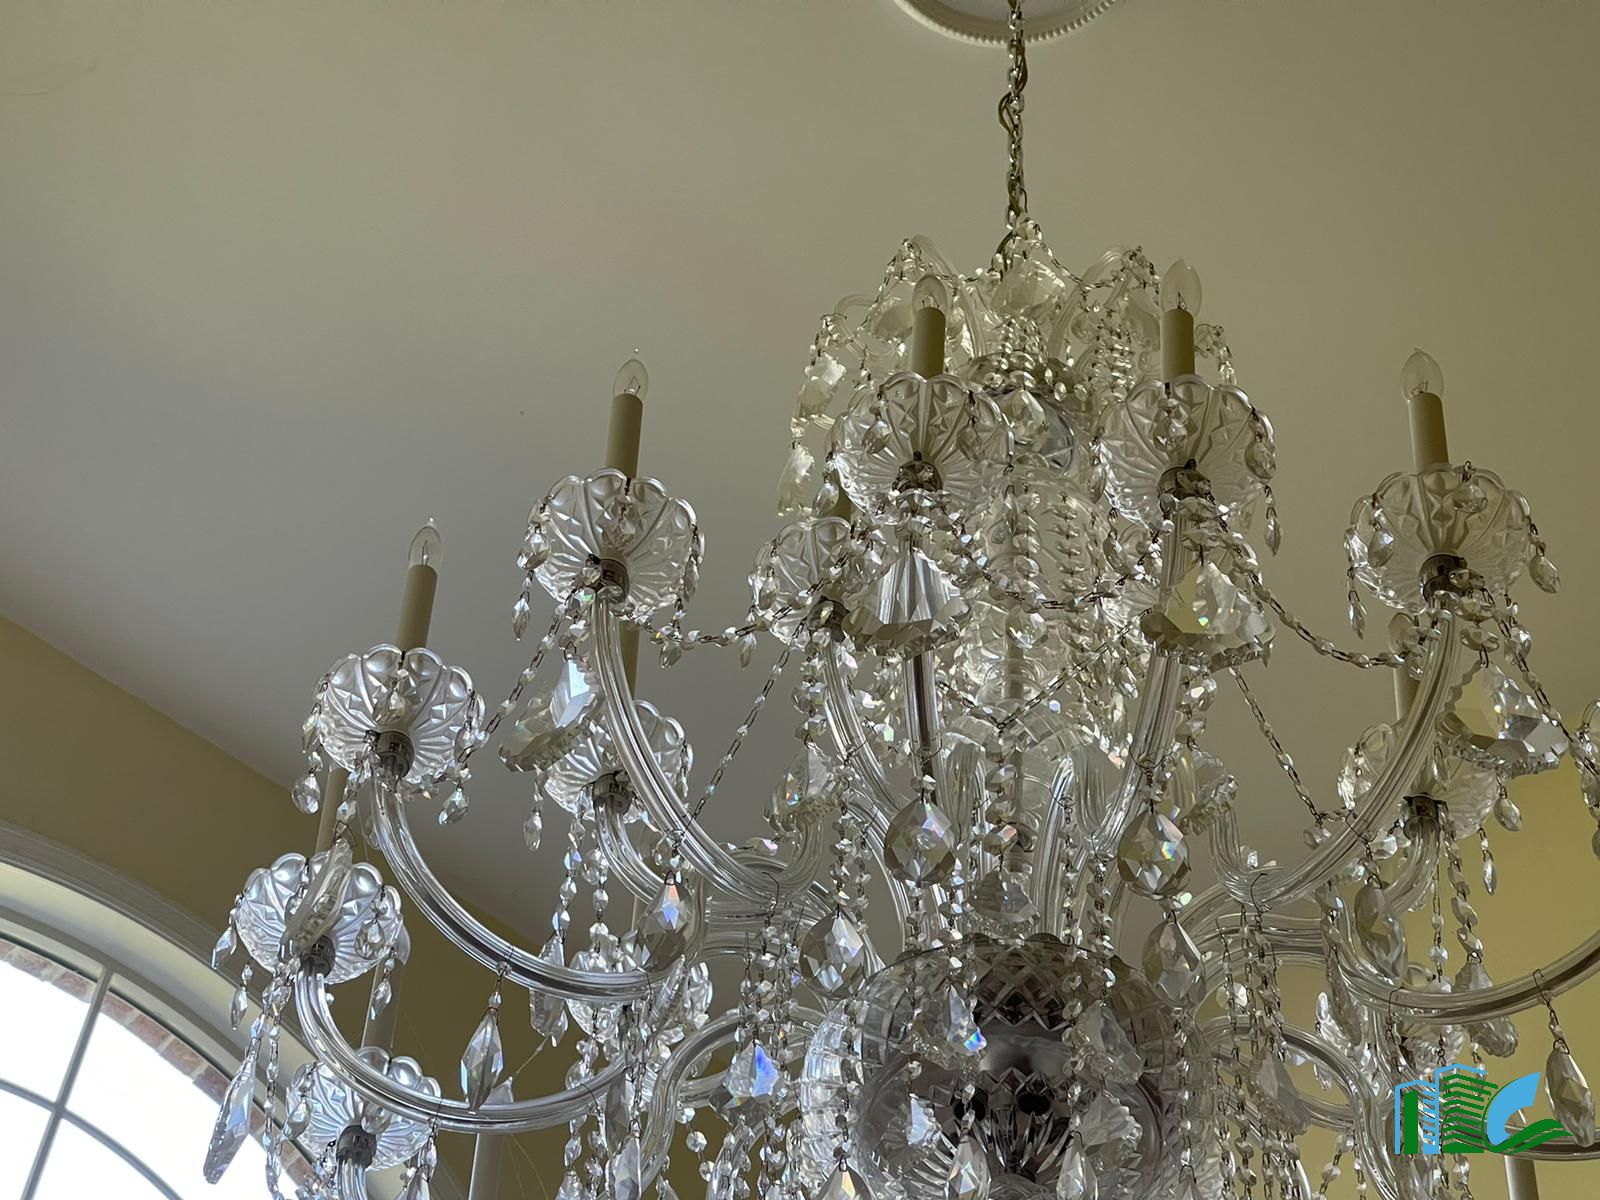 Light fixture cleaning services